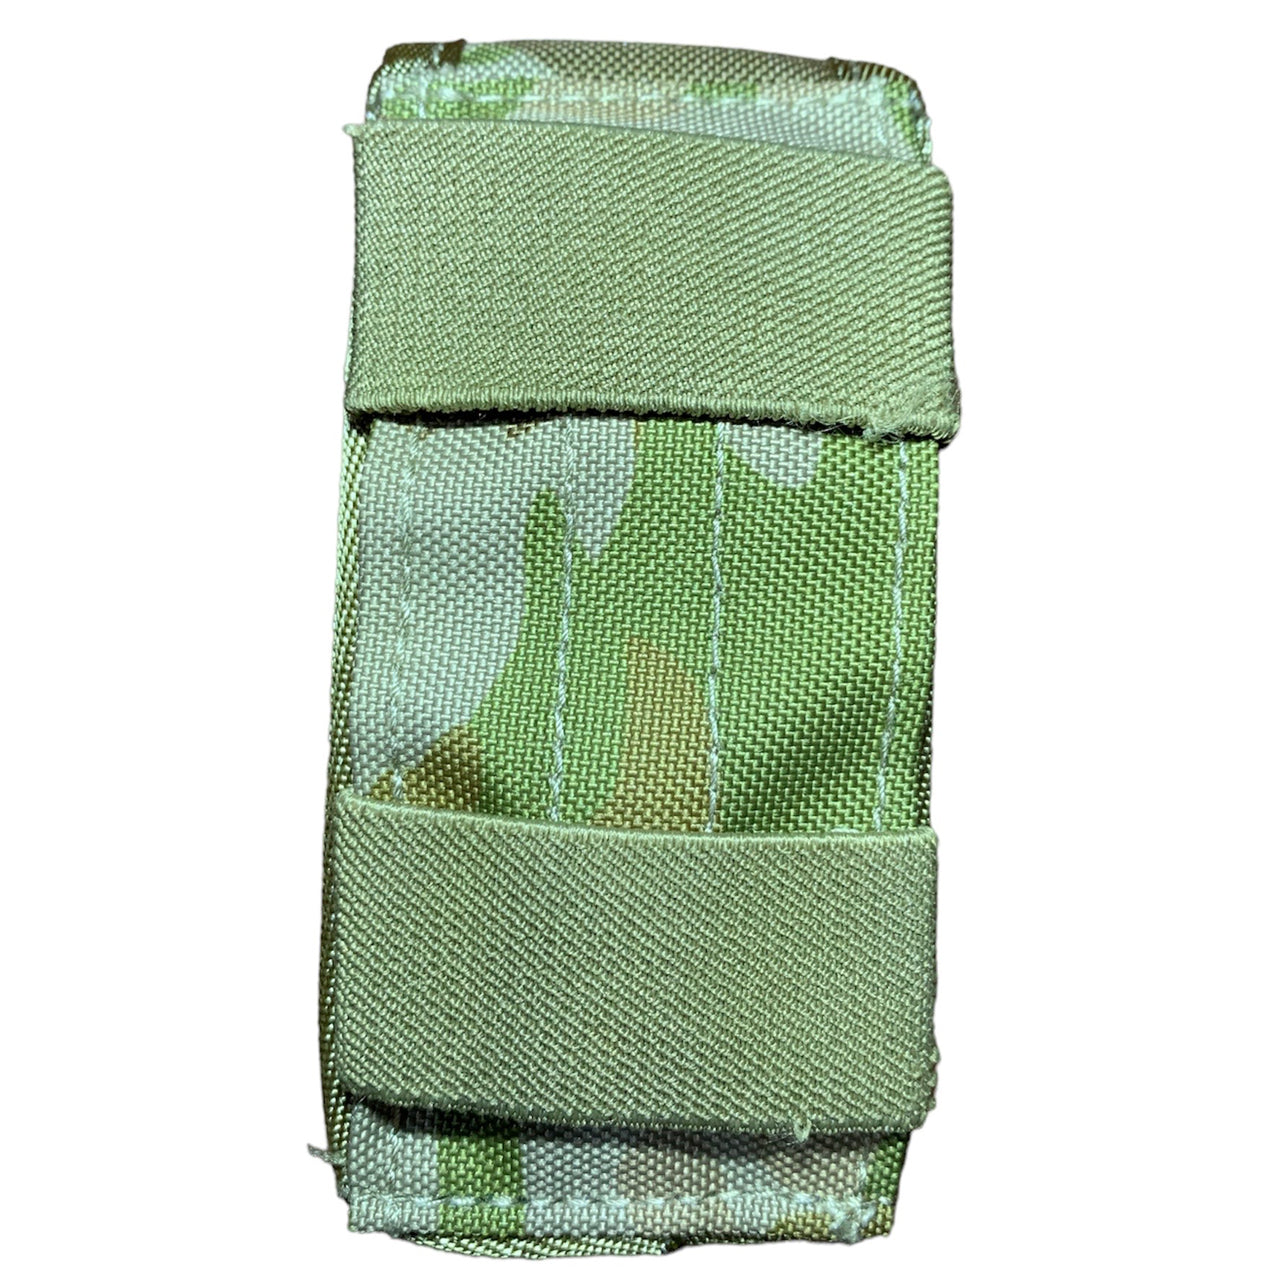 AMC Small Knife Multi-Purpose Pouch Heavy duty pouch Military specifications 900D material Double coated fabric Ideal for knives and smaller tools www.defenceqstore.com.au